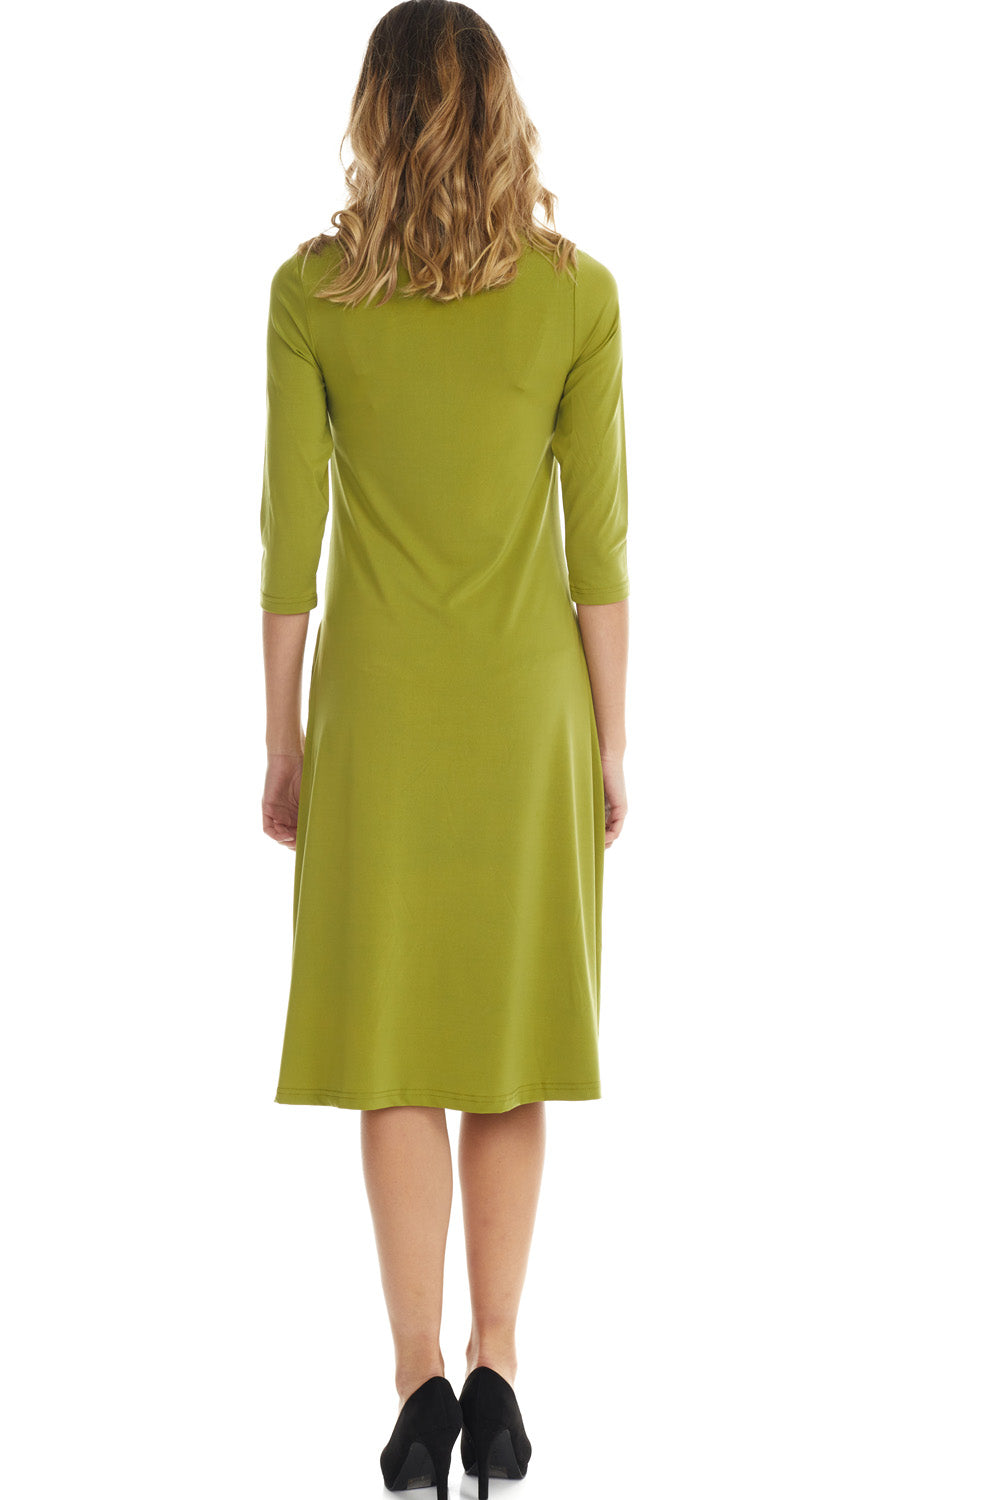 green flary below knee length 3/4 sleeve crew neck modest tznius a-line dress with pockets big enough for smartphone